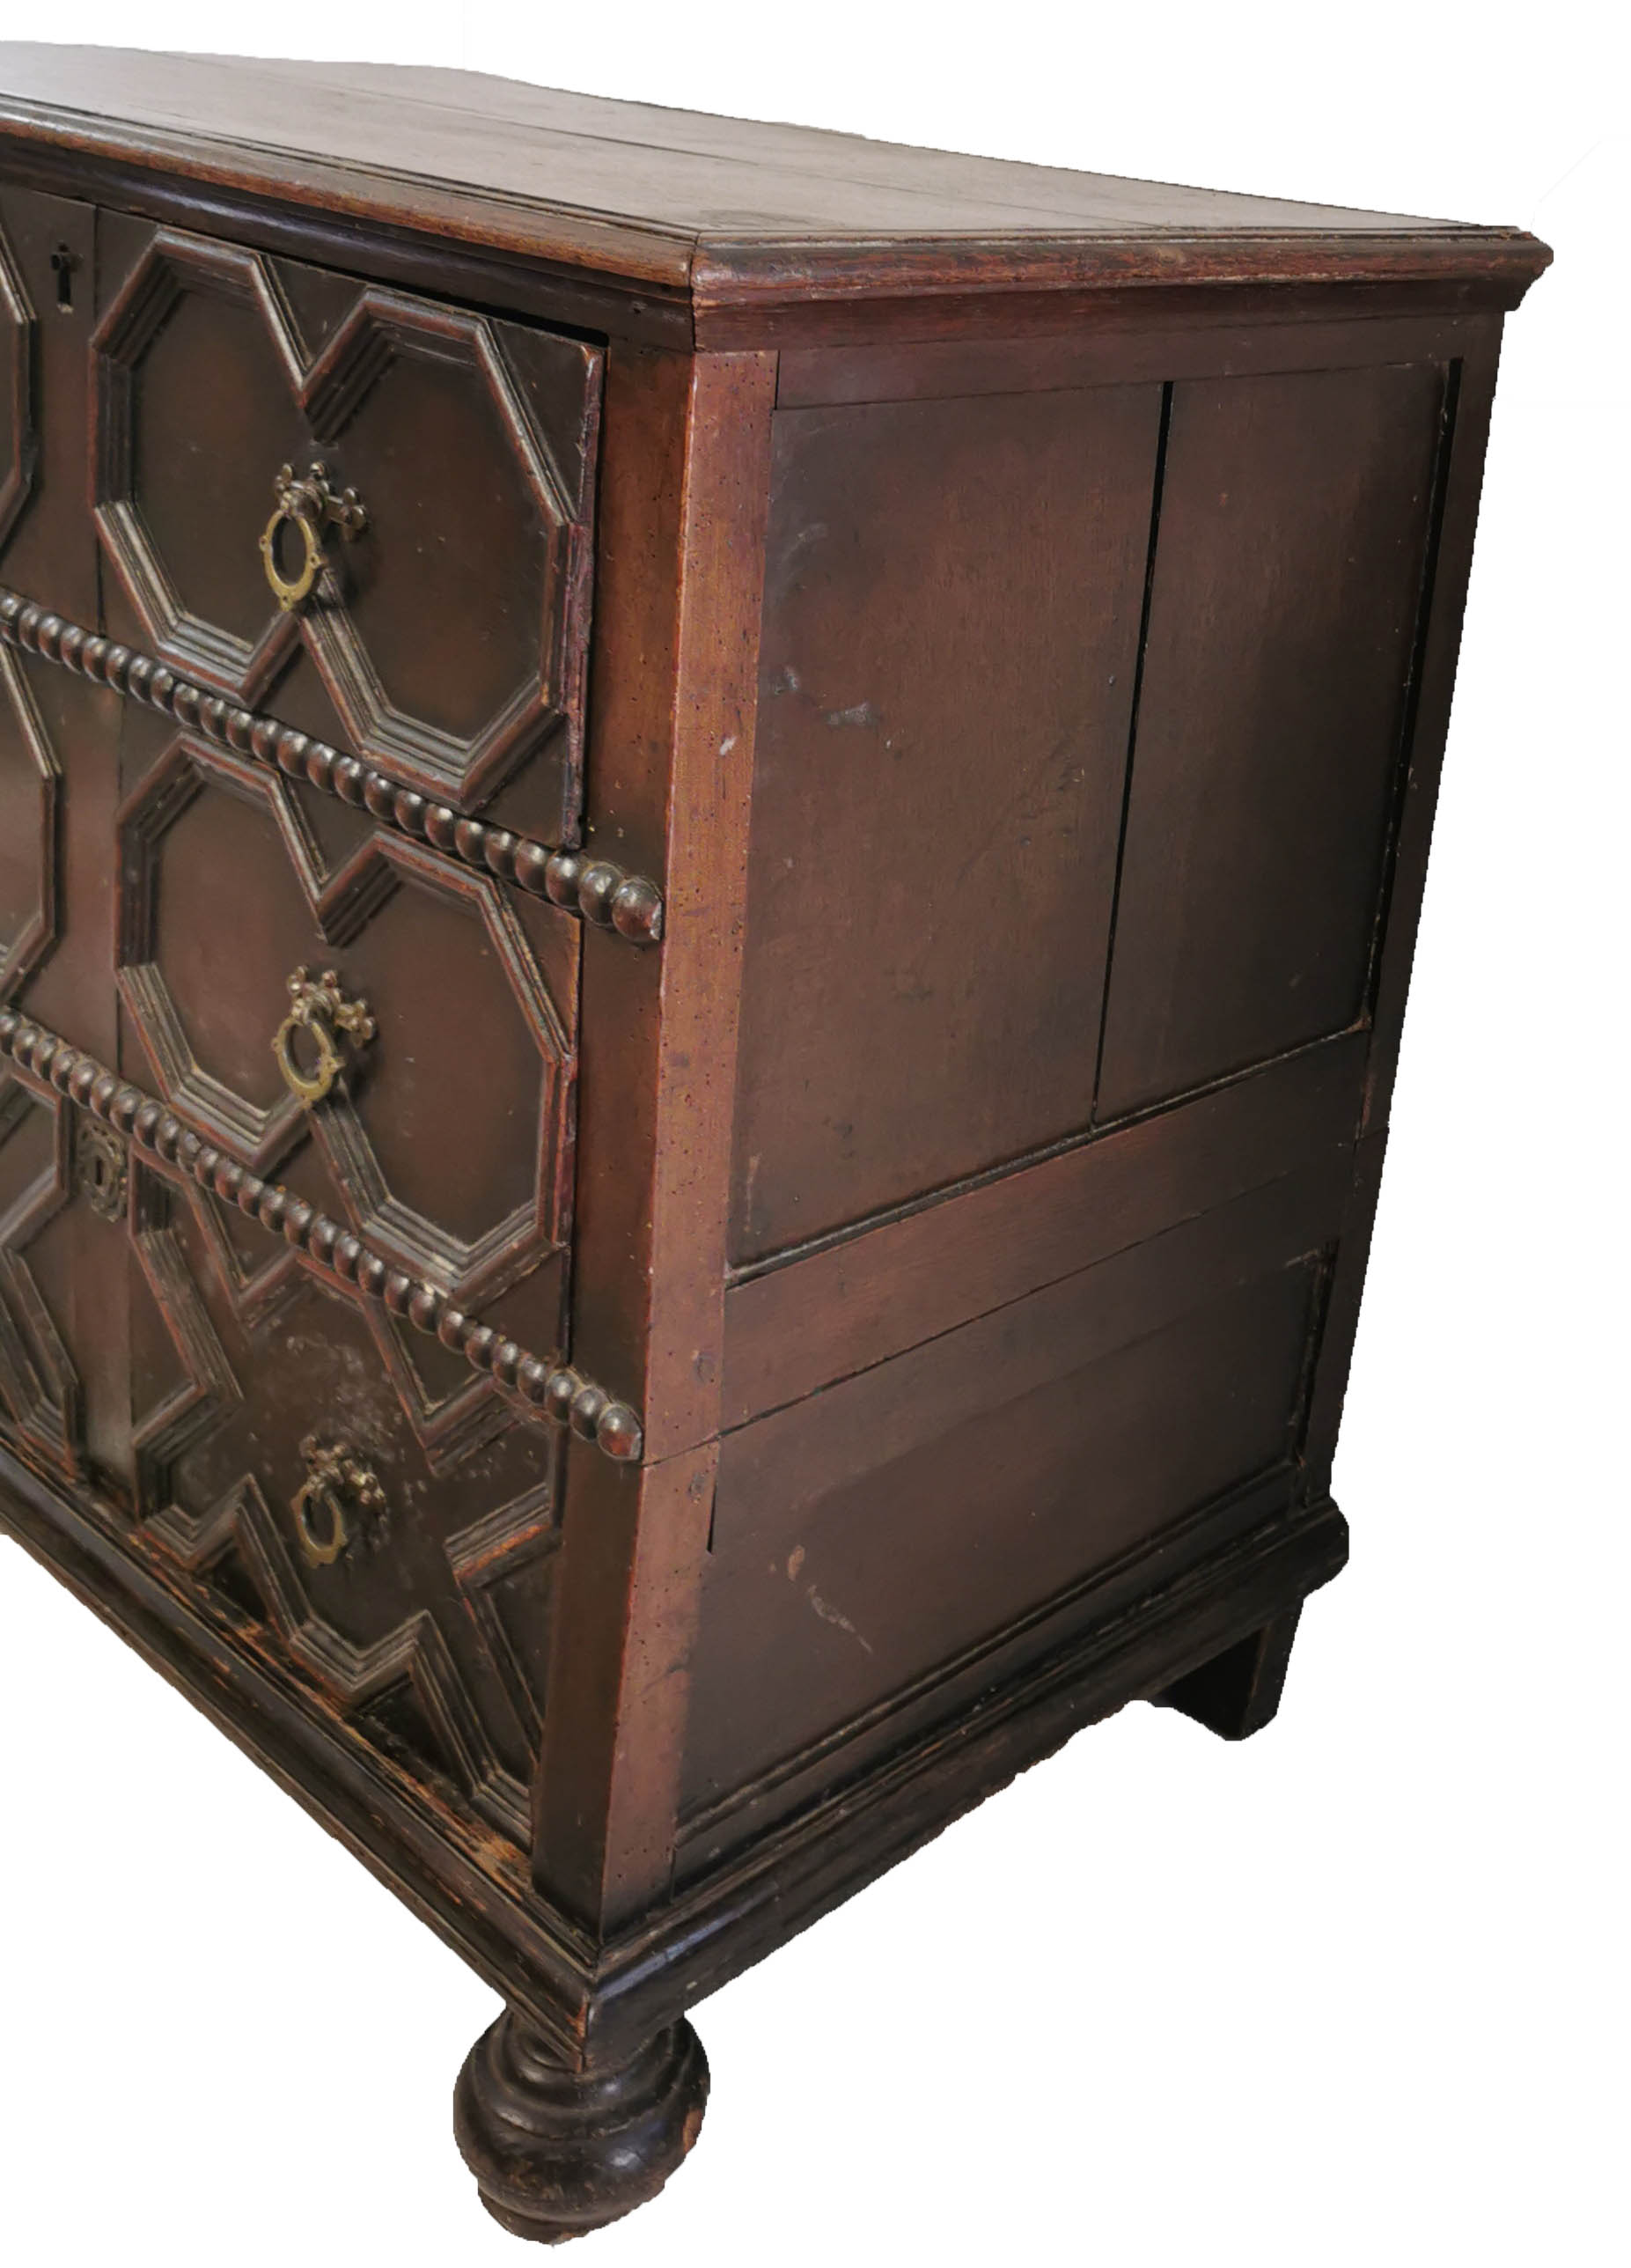 A WILLIAM AND MARY PERIOD OAK CHEST Of three drawers, on bun feet. (89cm x 53cm x 85cm) - Image 3 of 3